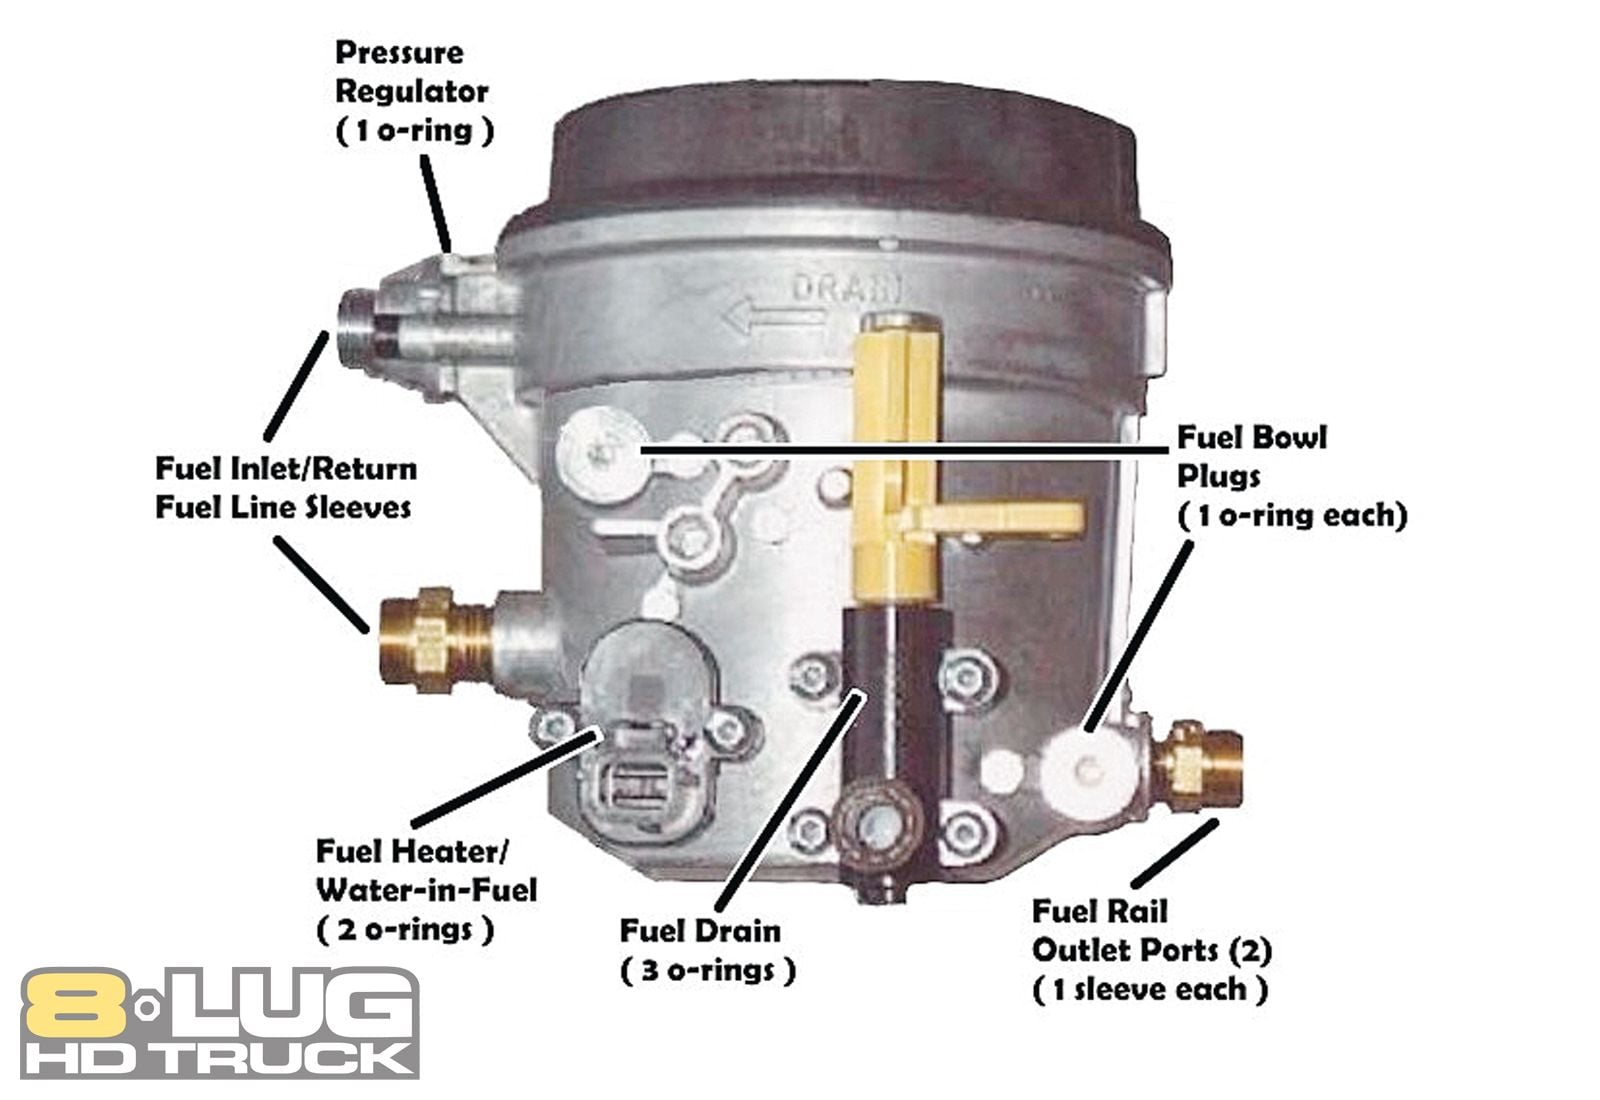 E99 73 Fuel Pressure Issue Page 3 Ford Truck Enthusiasts Forums.